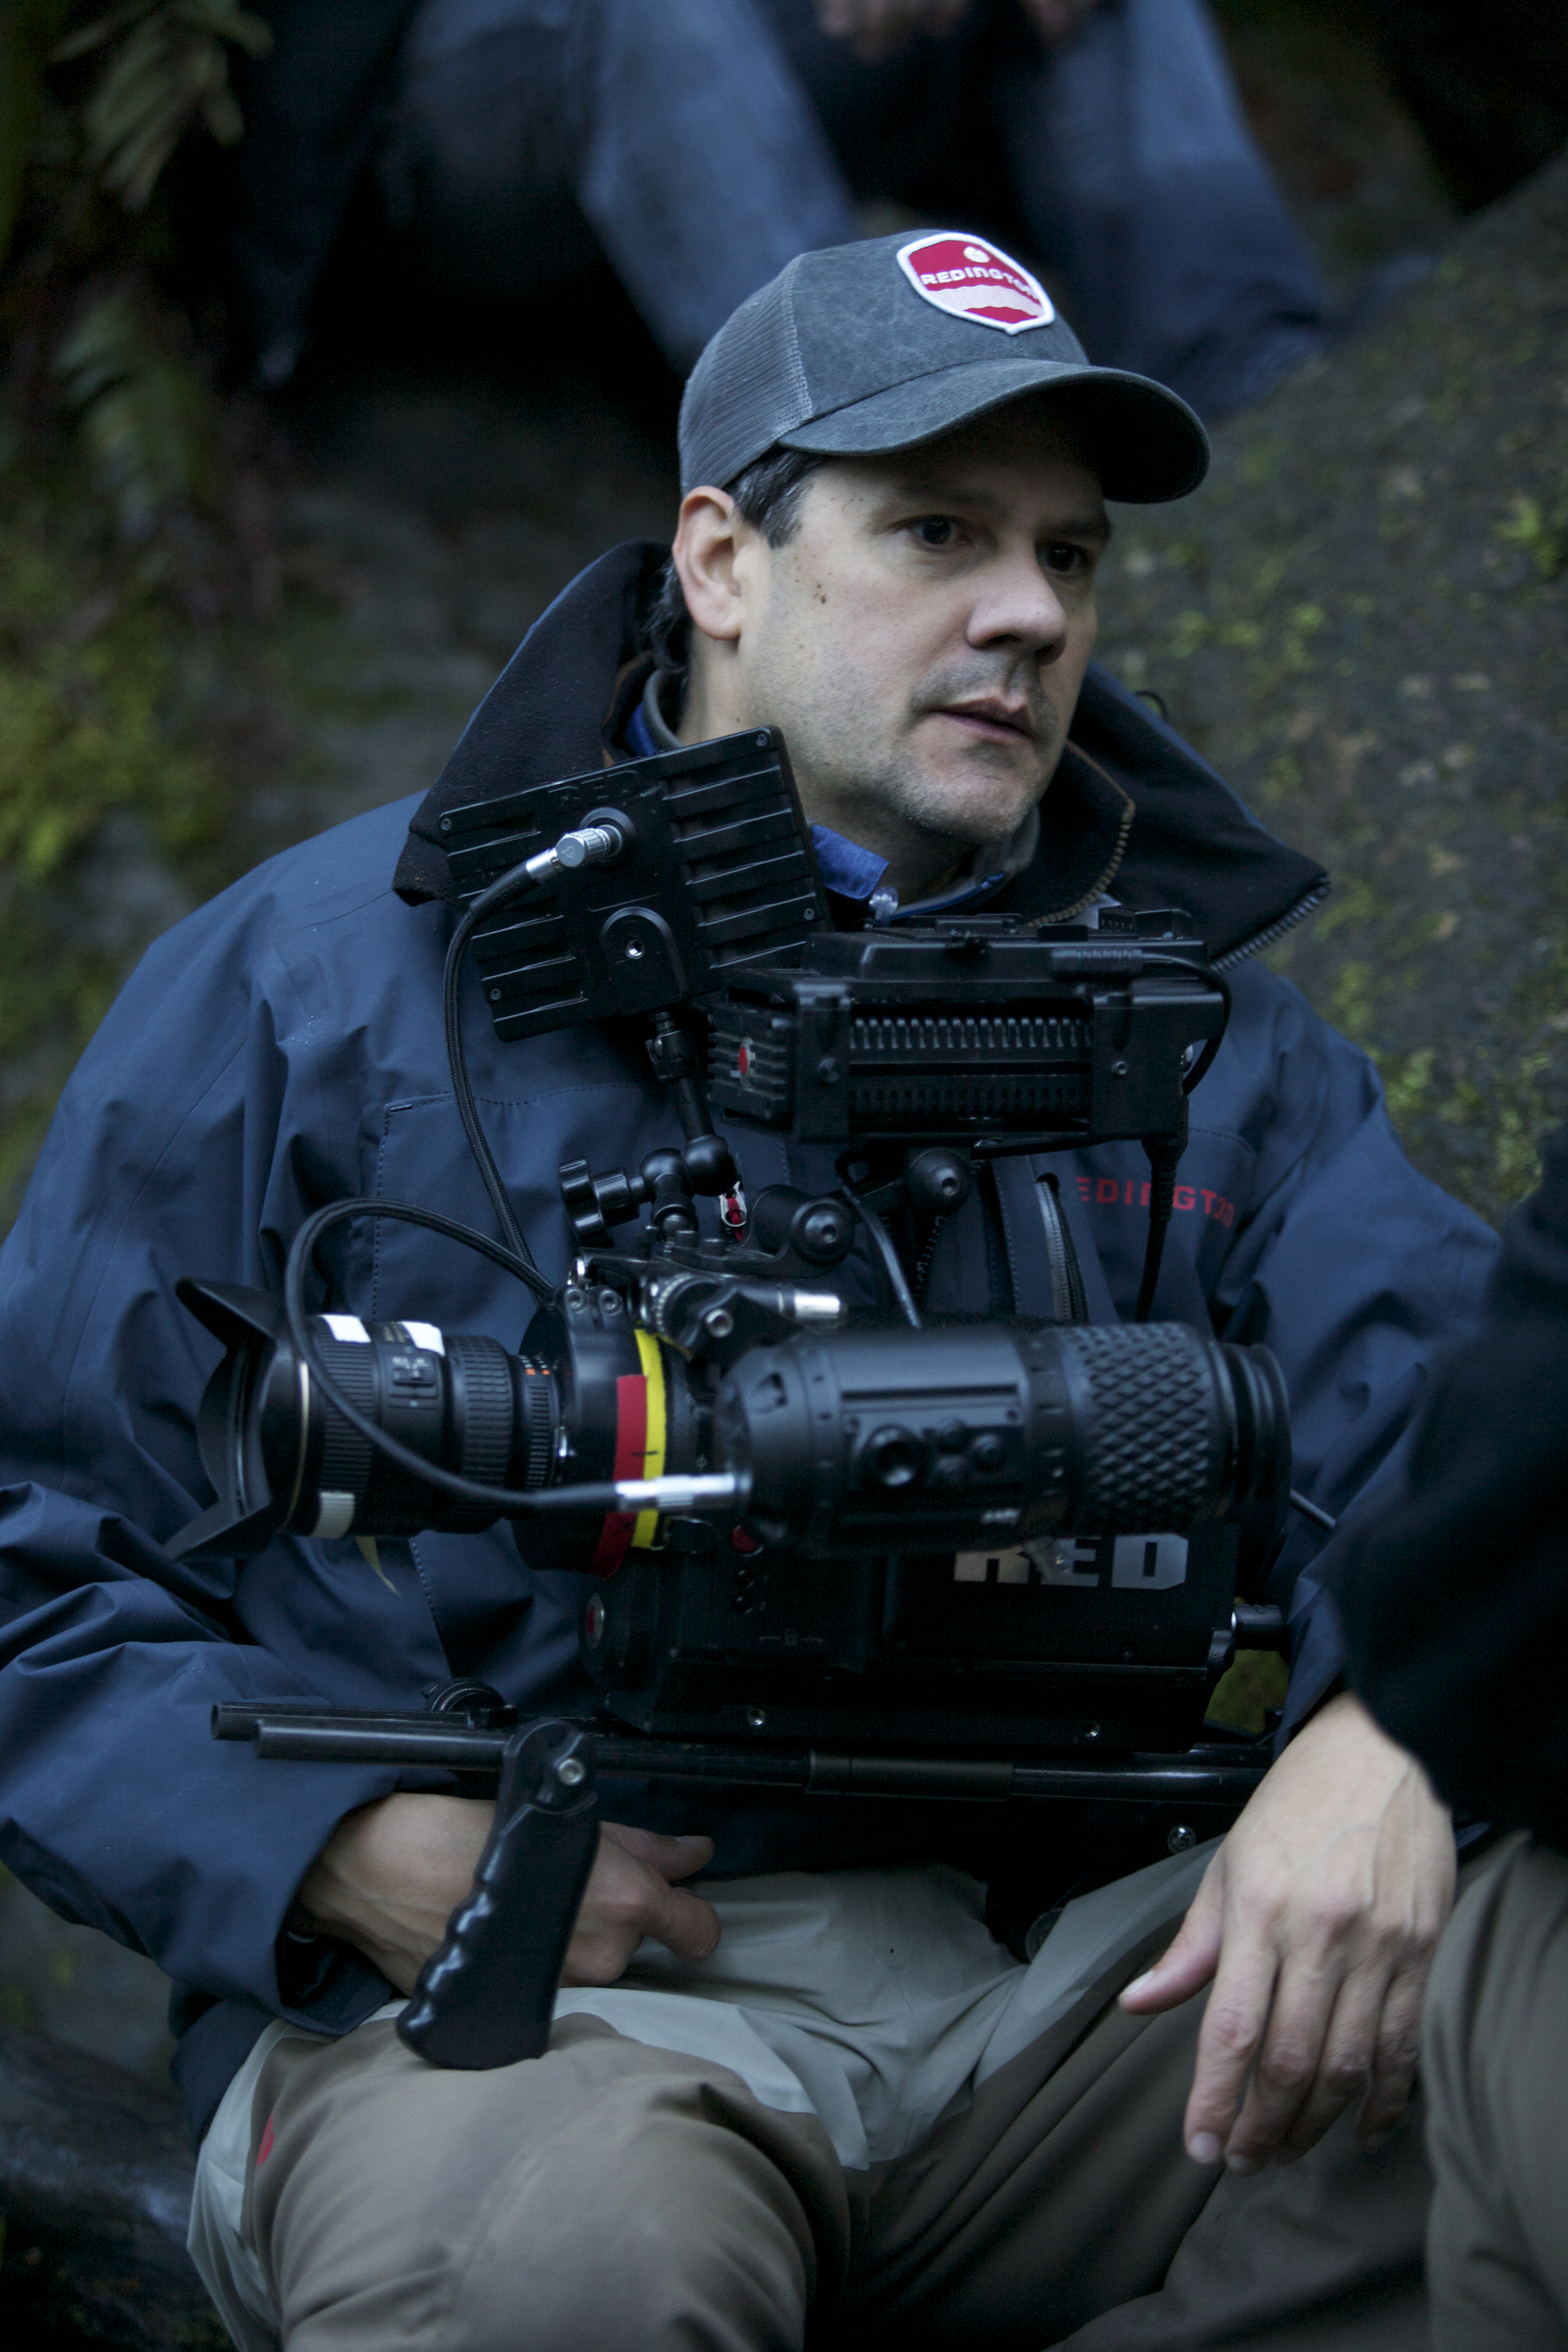 Director Scott A. Capestany contemplating his next shot high above a 100 foot waterfall (notice the boulders behind him)on location at Lake Quinault, WA while filming his TV Series THE RAINFOREST.